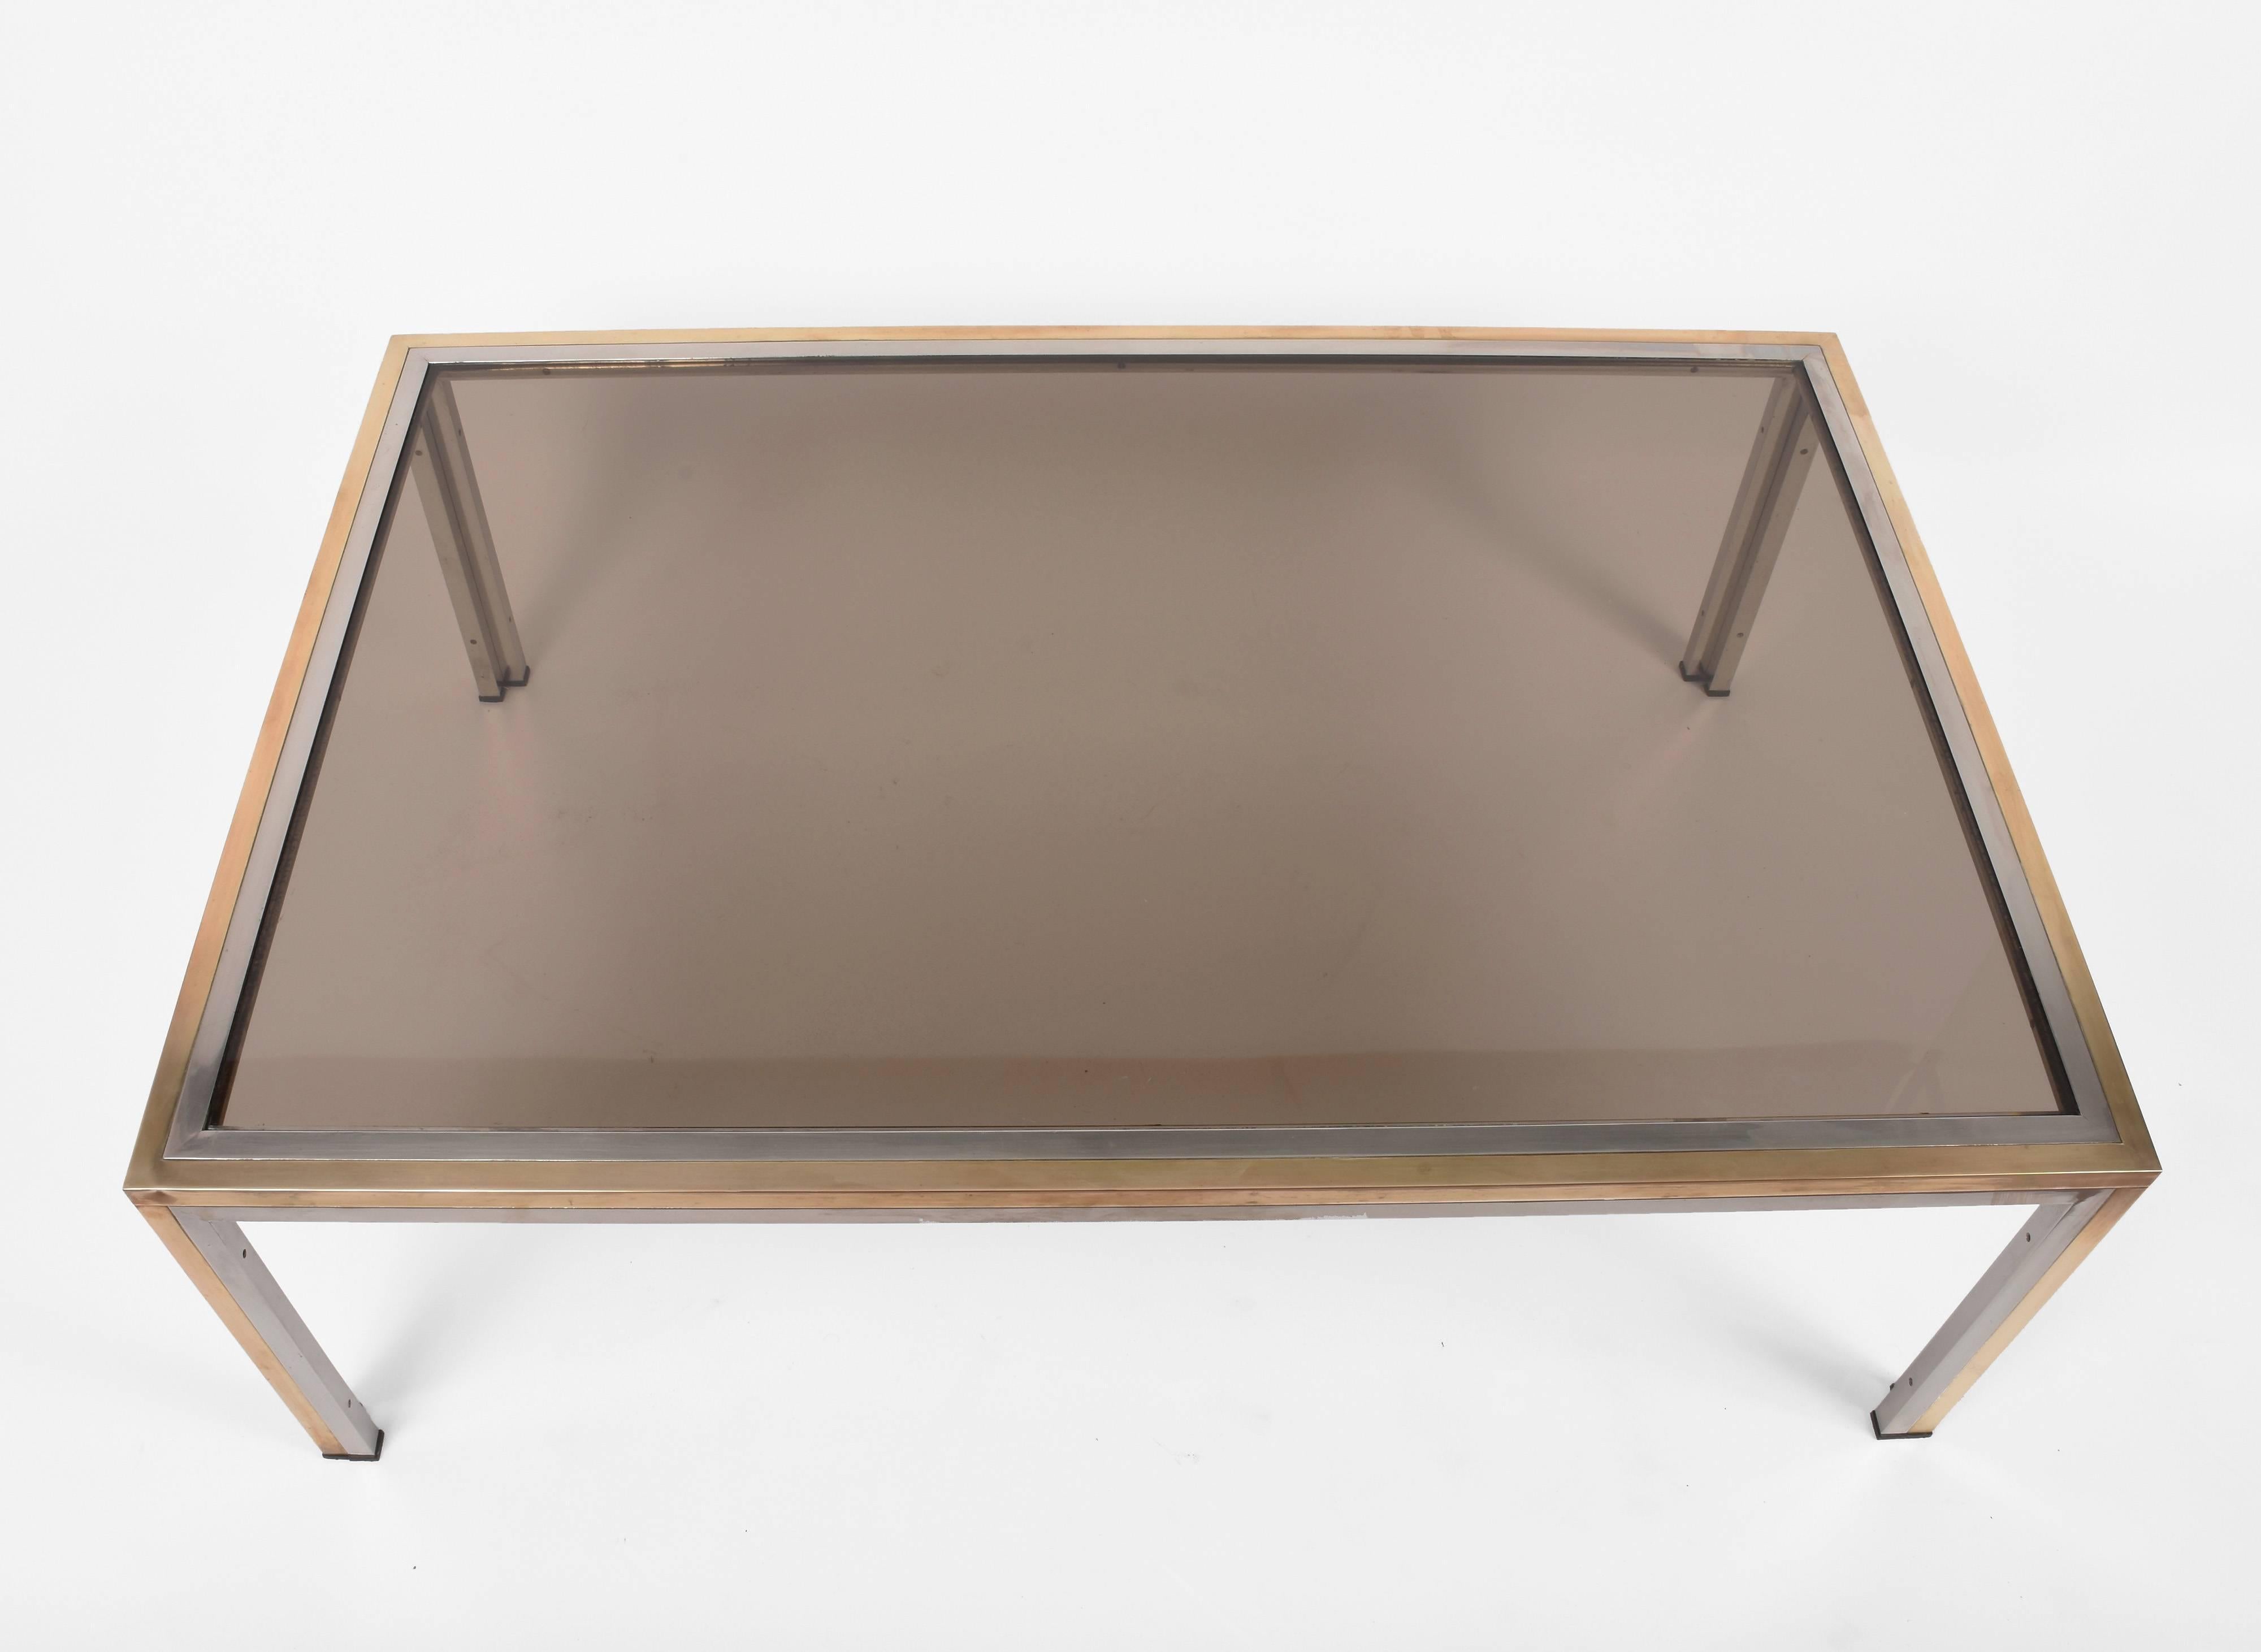 Elegant coffee table in chromed metal and brass, smoked glass adds to the seductive elegance of this midcentury piece.
Measurements: 120 x 80 H 40.